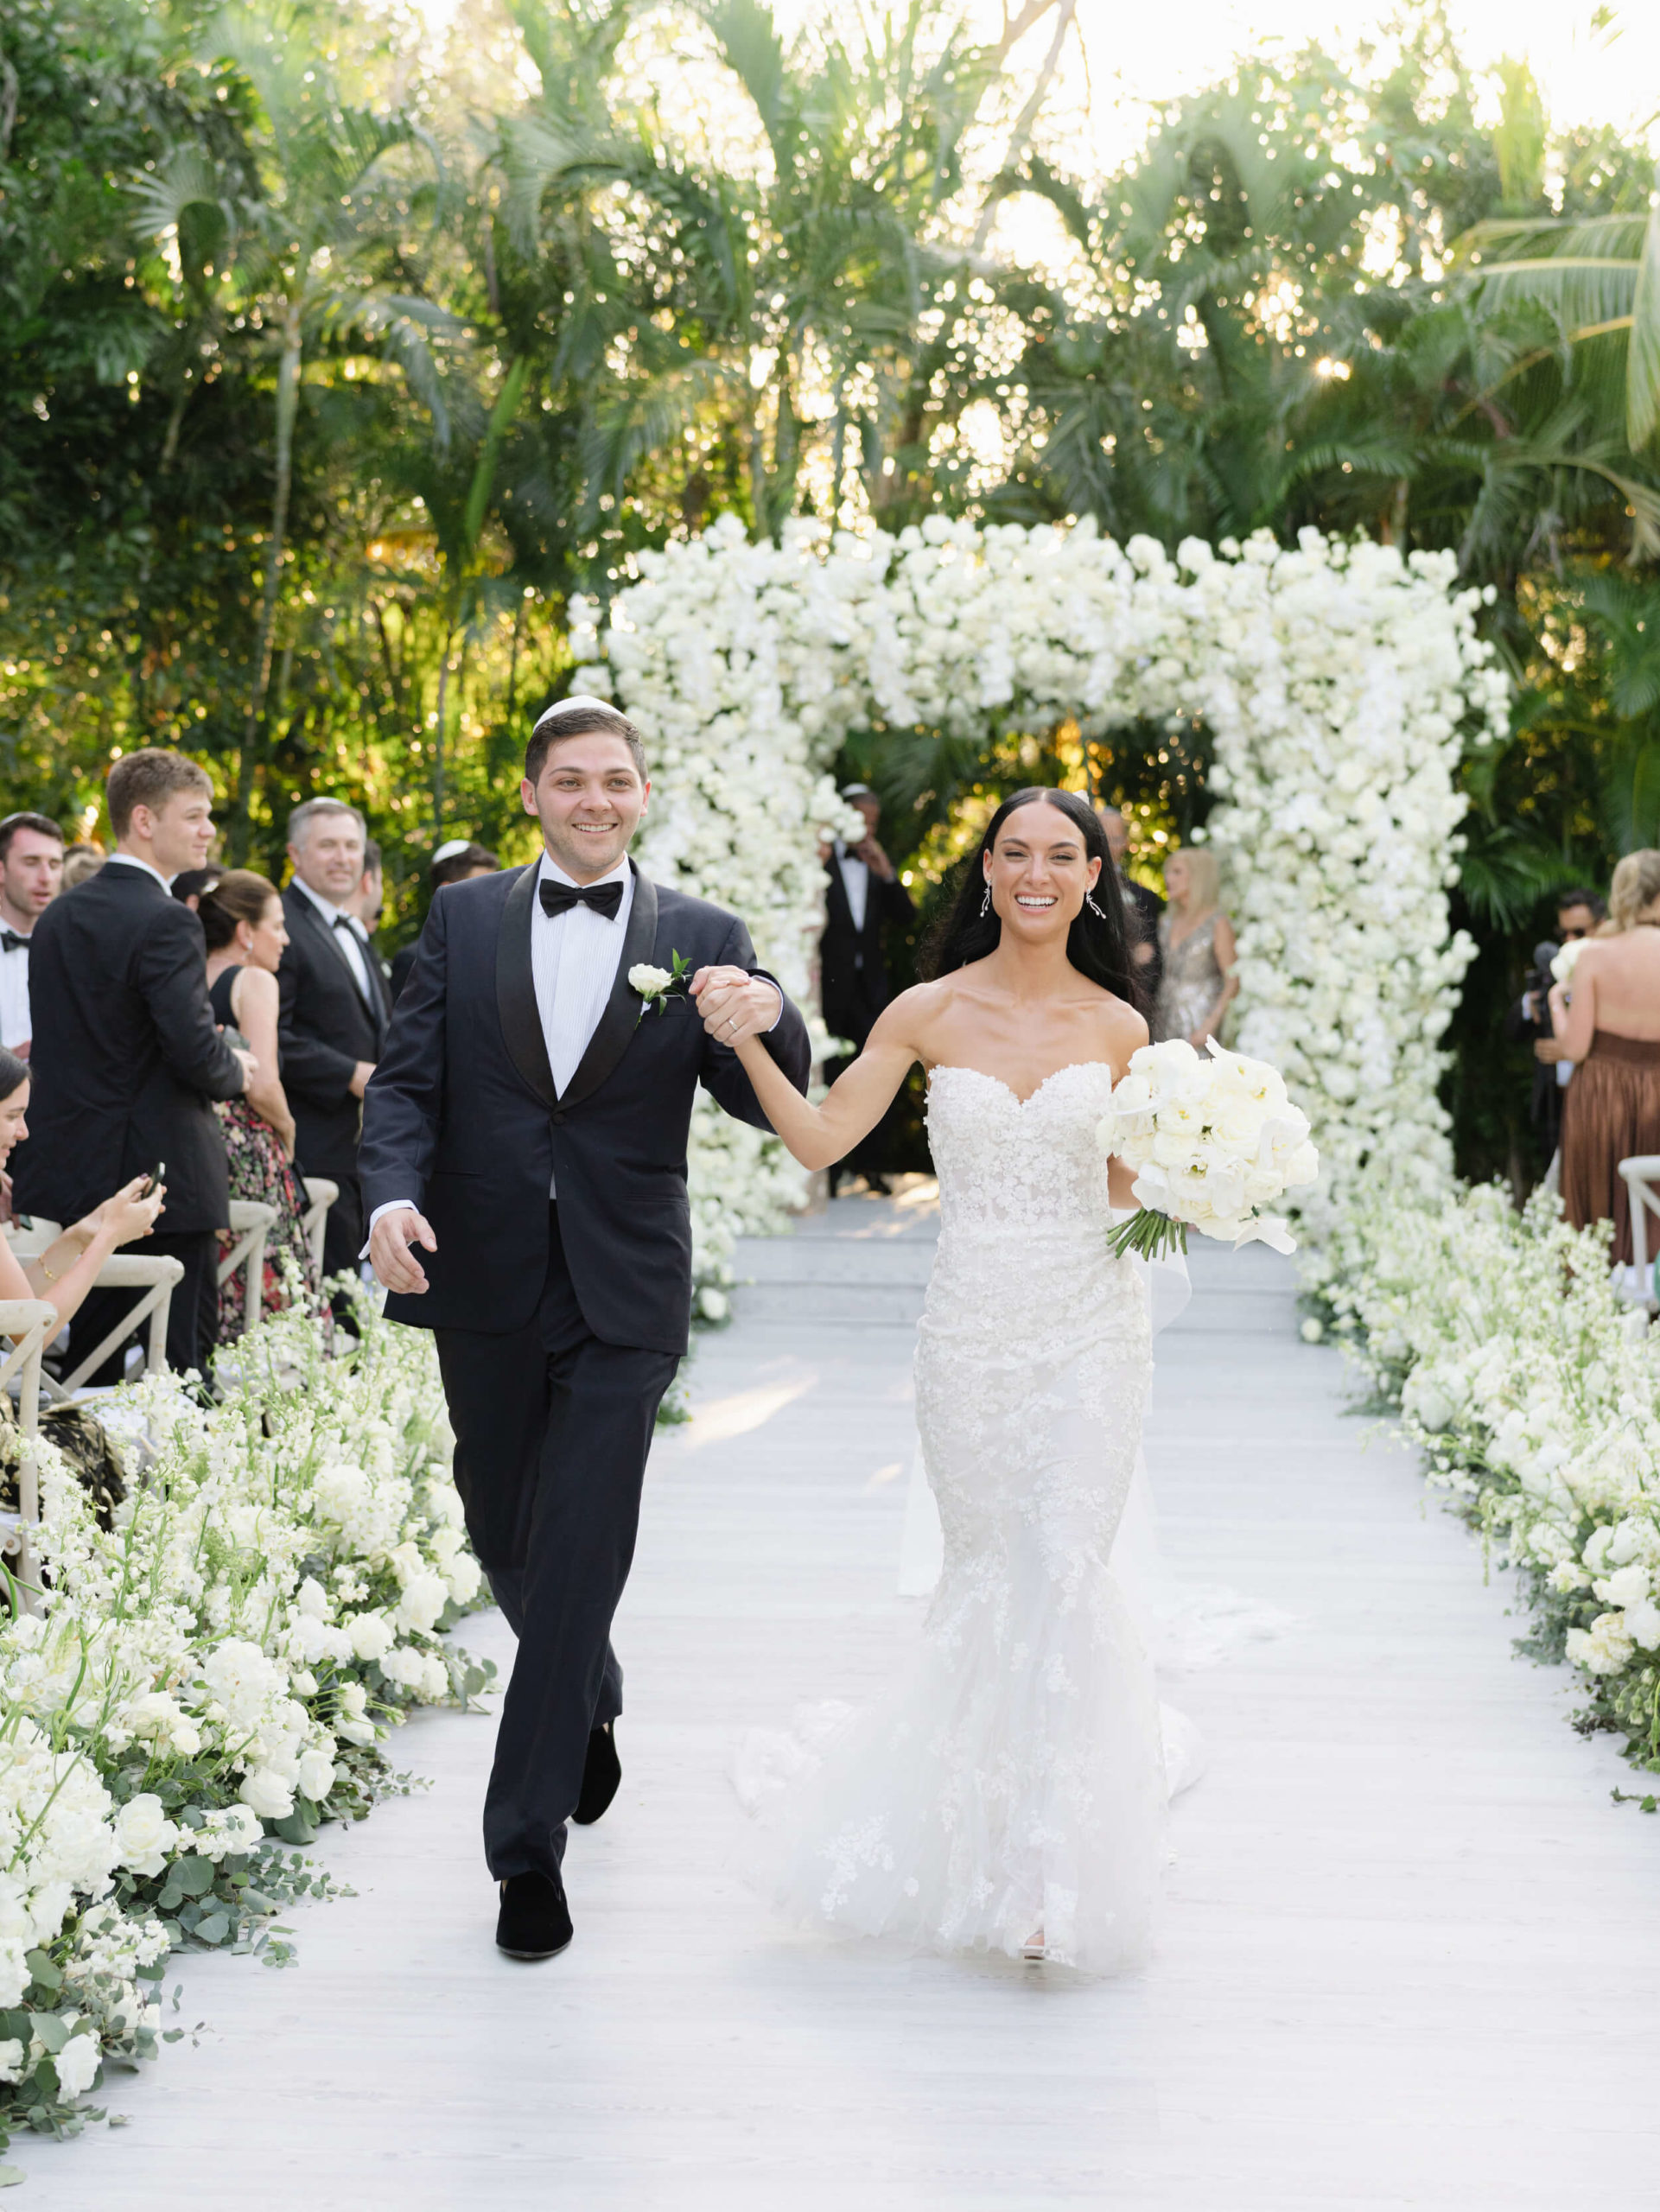 Danielle and Lucas smiling hand in hand as they walk down the isle after officially marrying